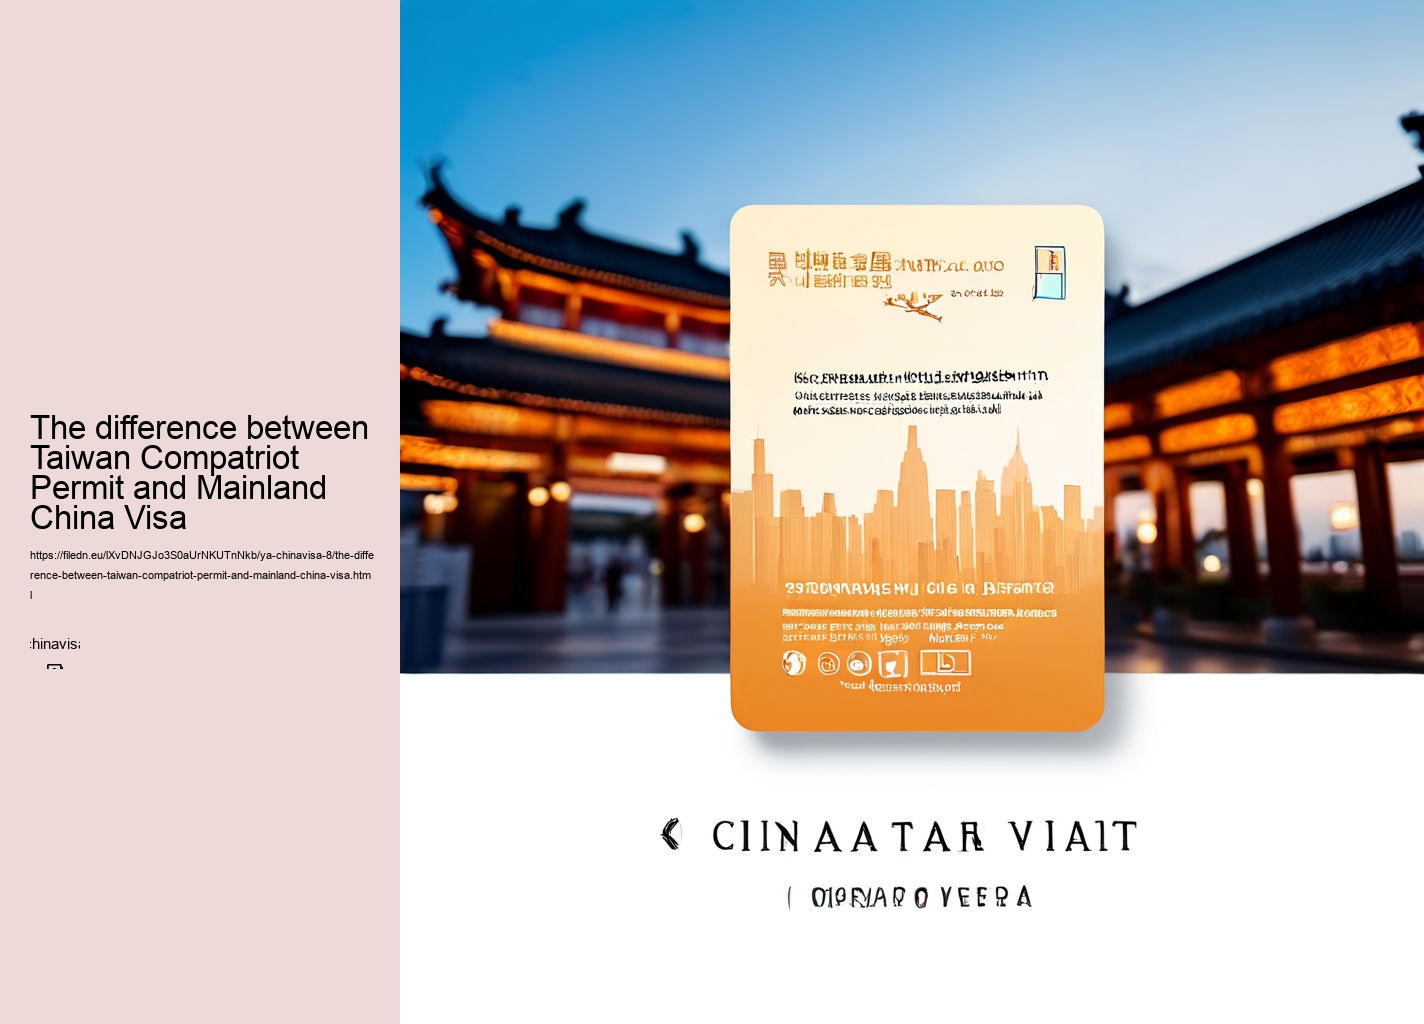 The difference between Taiwan Compatriot Permit and Mainland China Visa